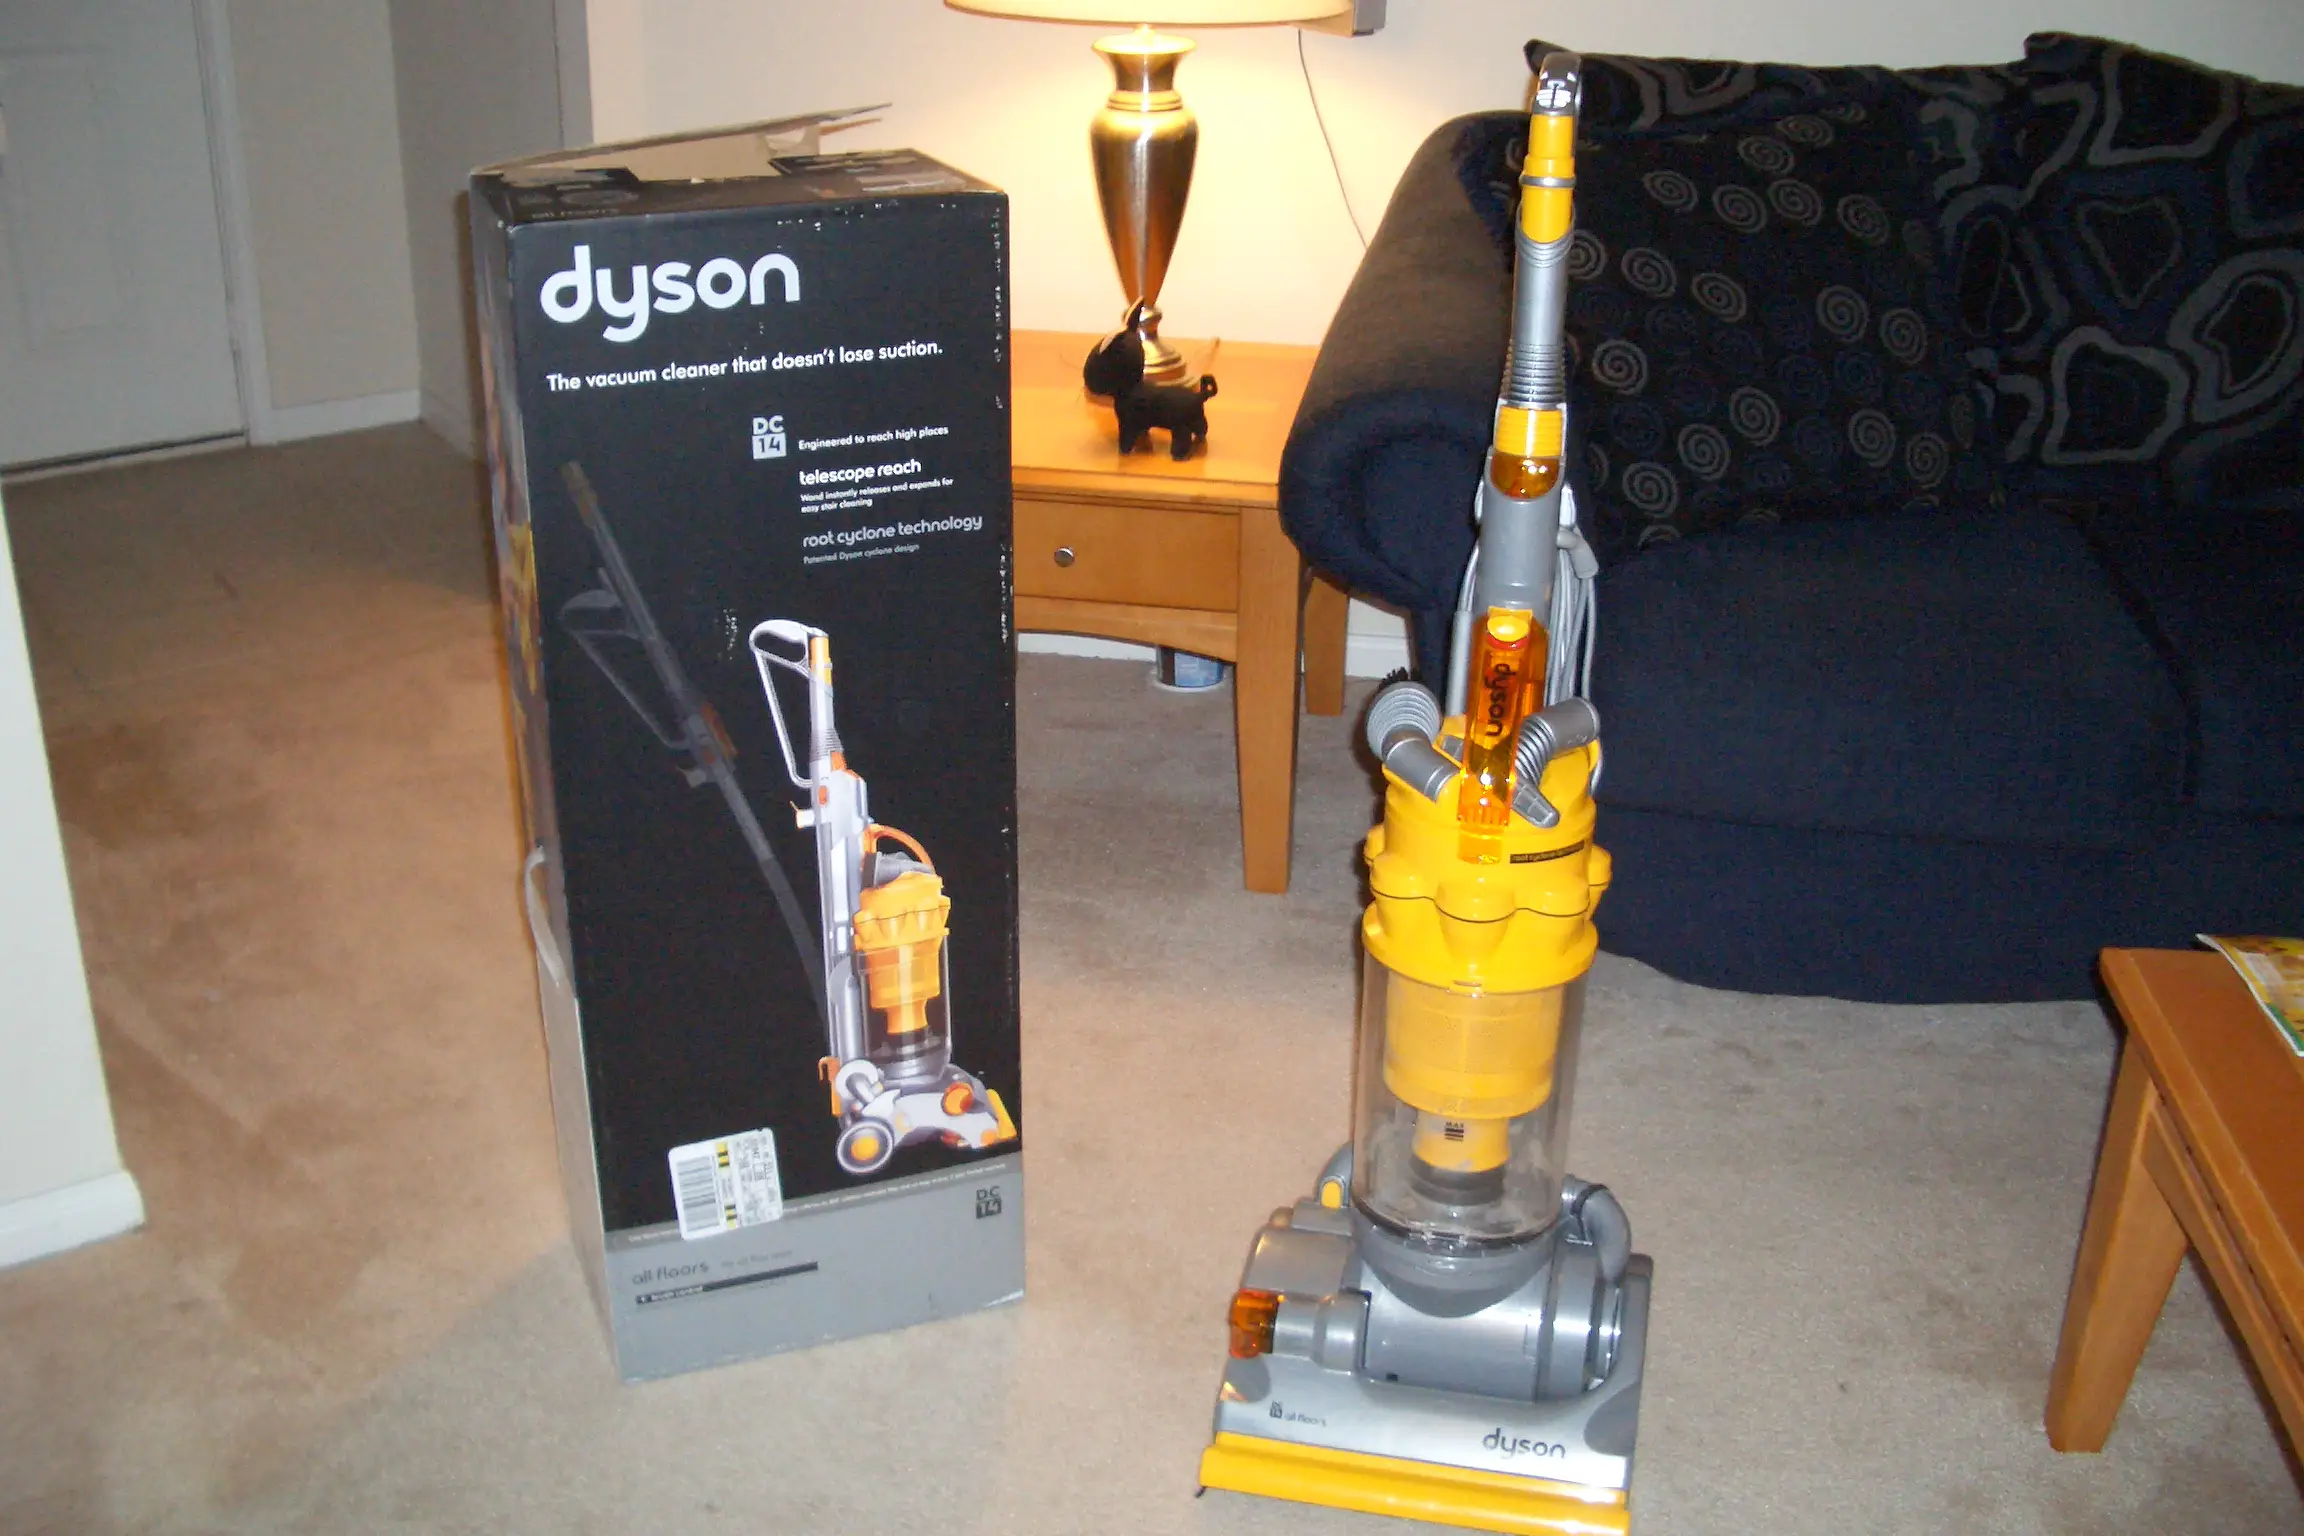 How To Use Dyson Vacuum [Detailed Guide]